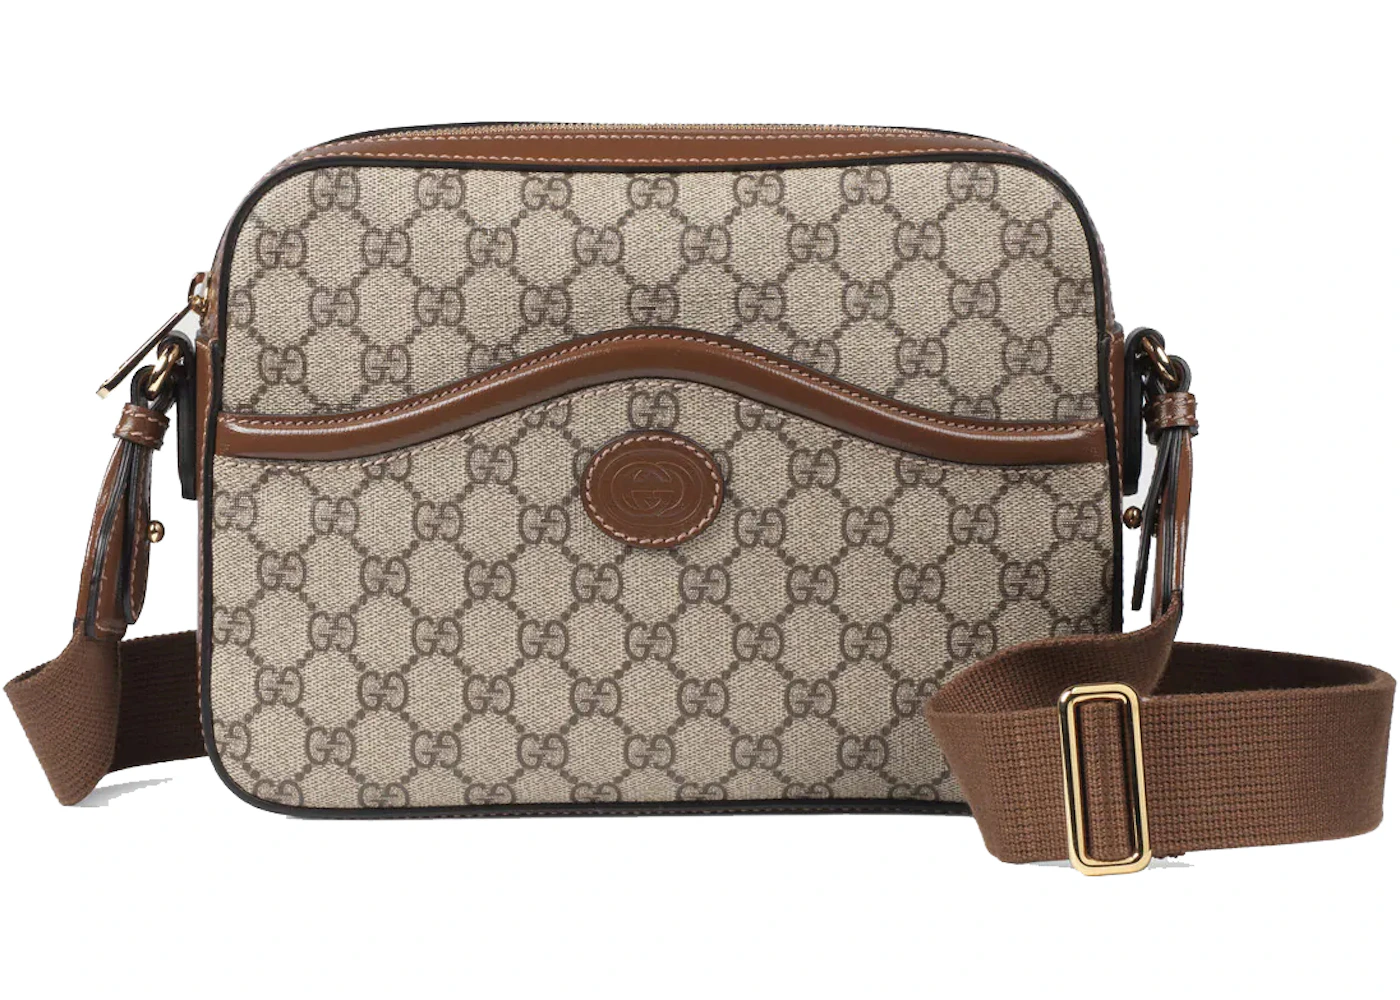 Gucci Messenger Bag with Interlocking G Beige/Ebony in Canvas with Gold ...